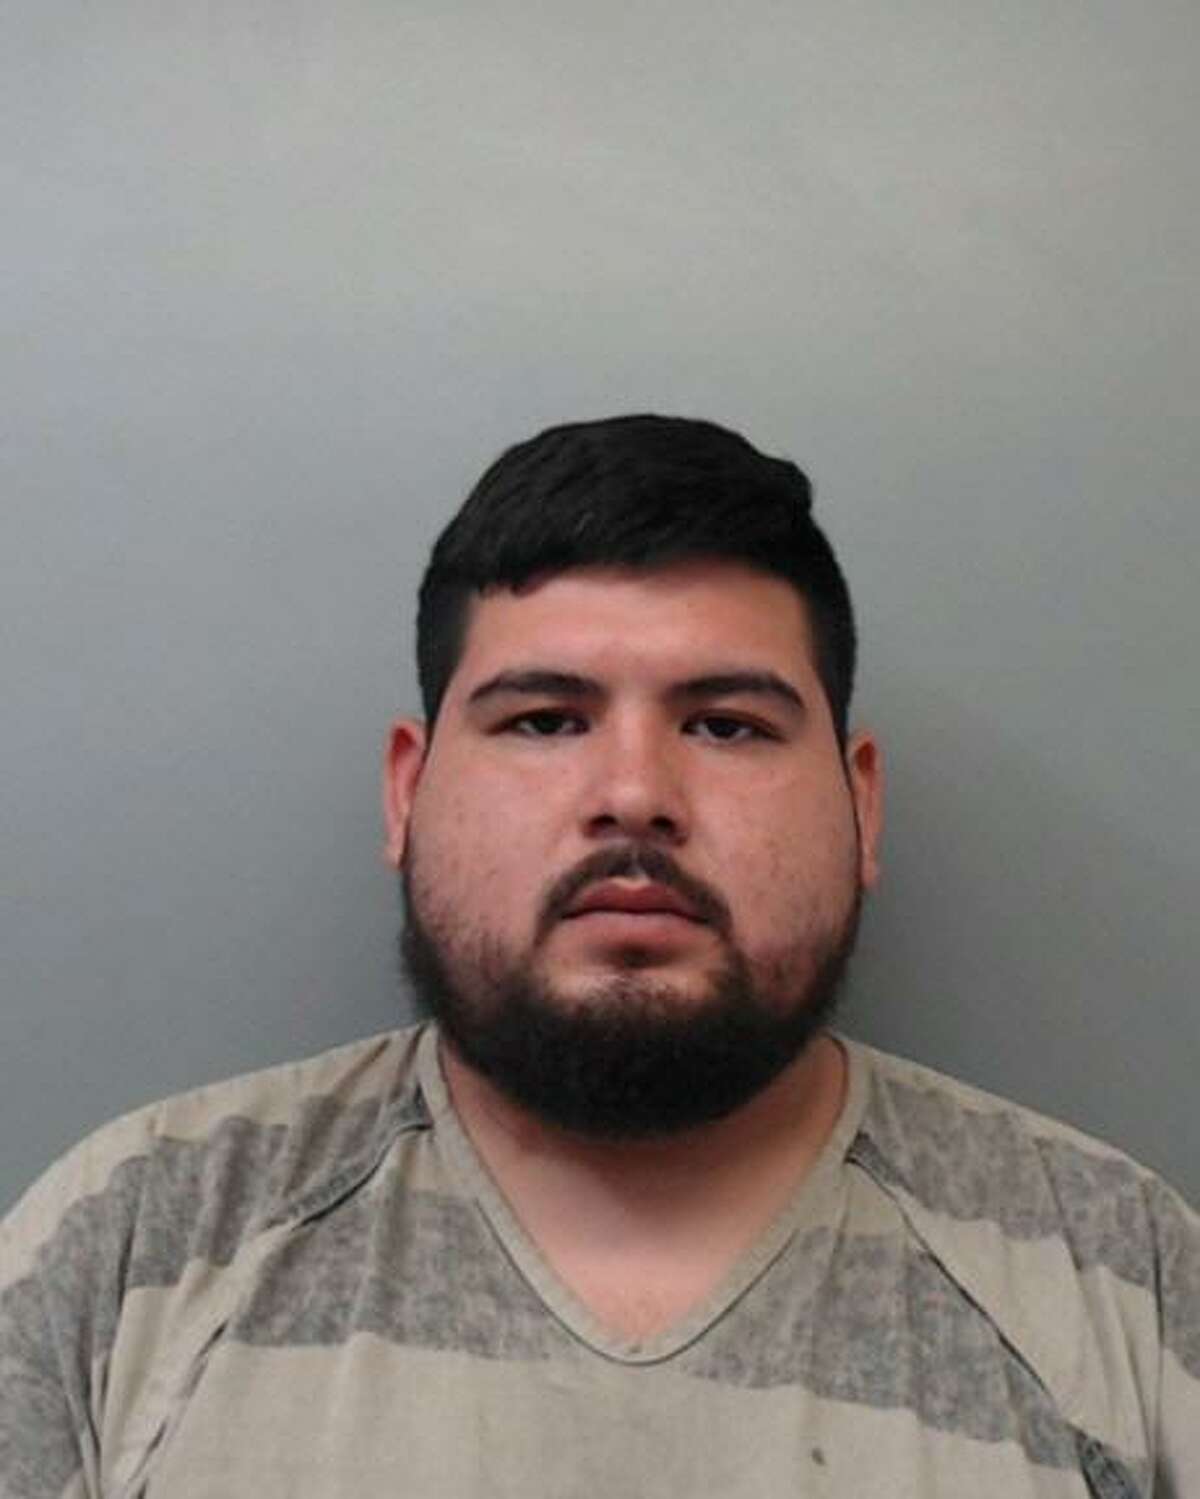 Alberto Alvarez, 21, was charged with aggravated robbery with a firearm, deadly conduct and discharge of a firearm.